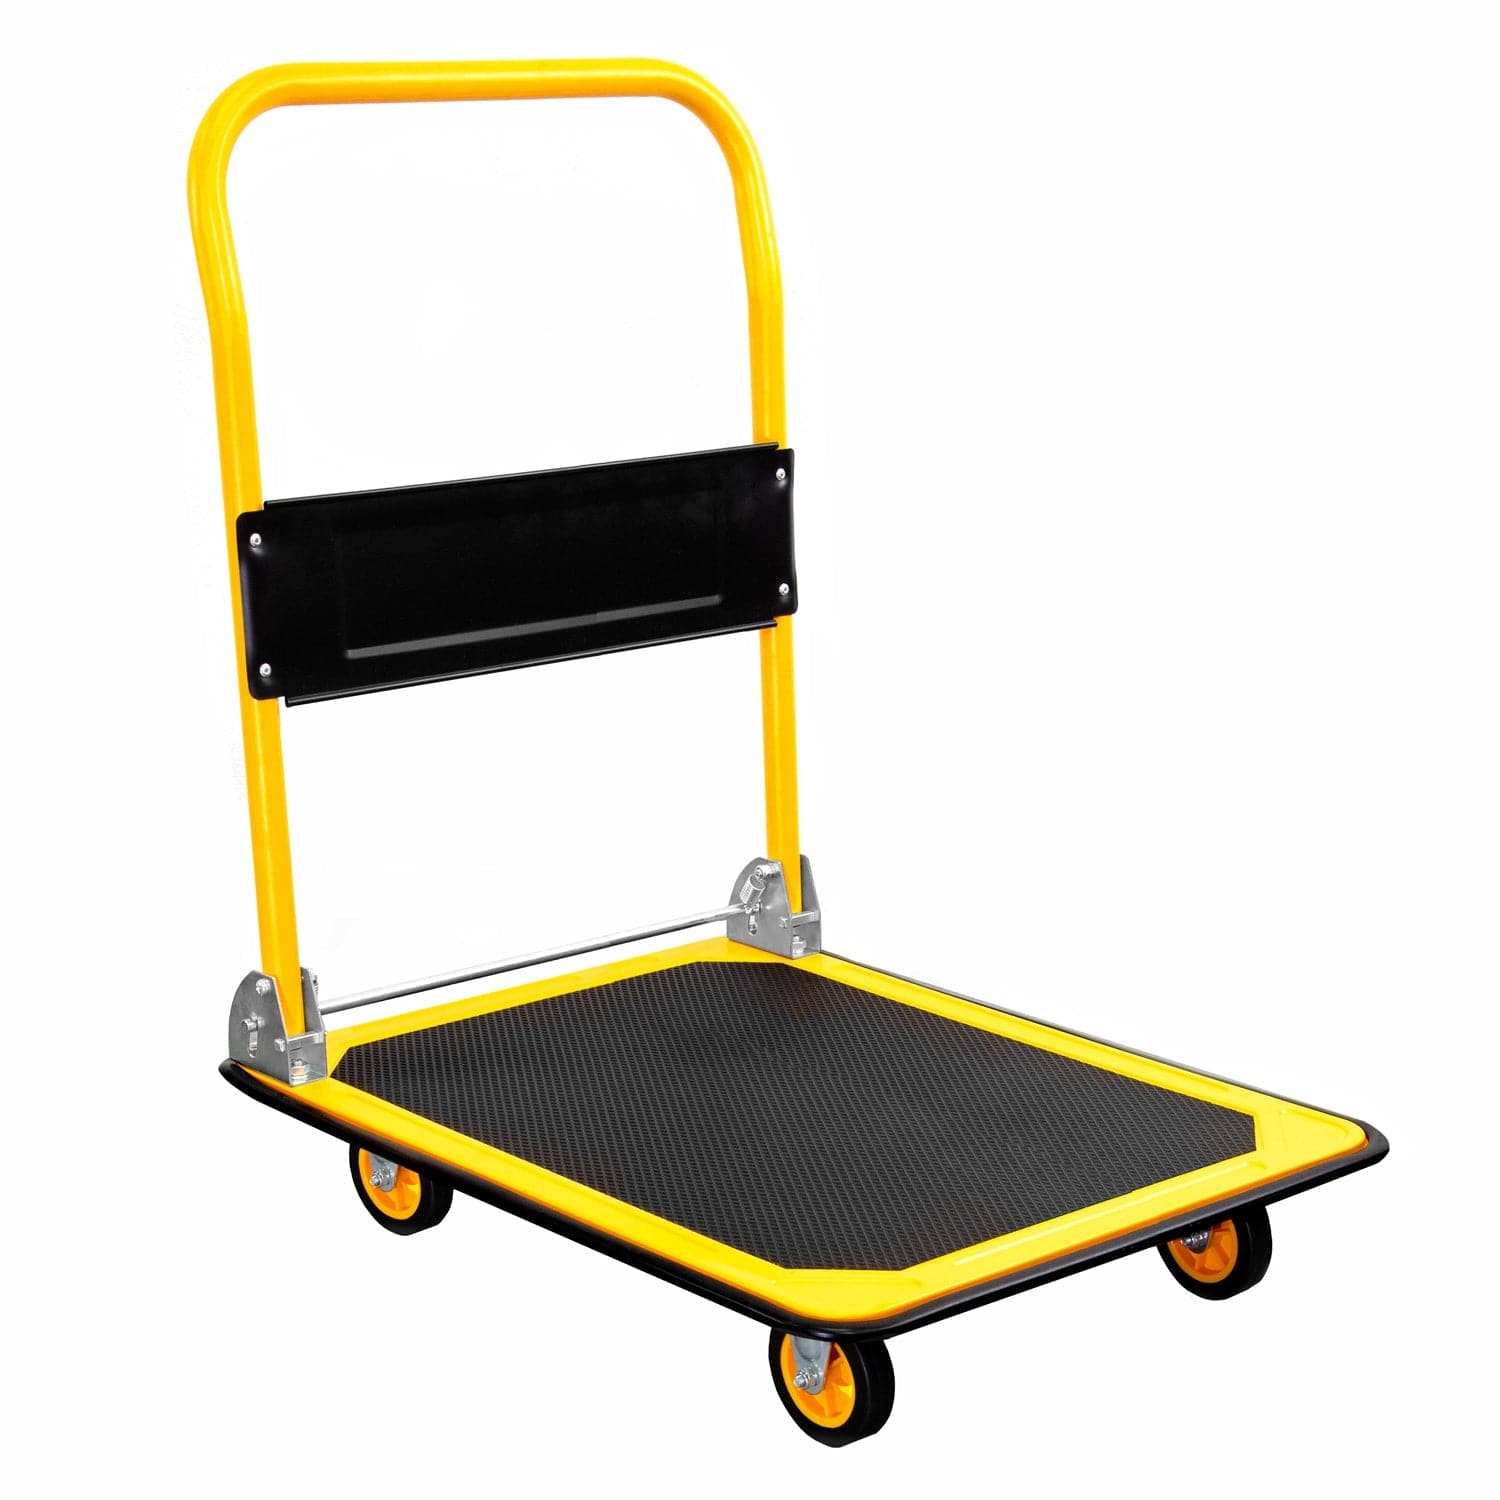 https://cdn.shopify.com/s/files/1/0051/3674/4566/products/heavy-duty-foldable-flatbed-with-swivel-wheels-382556.jpg?v=1687285627